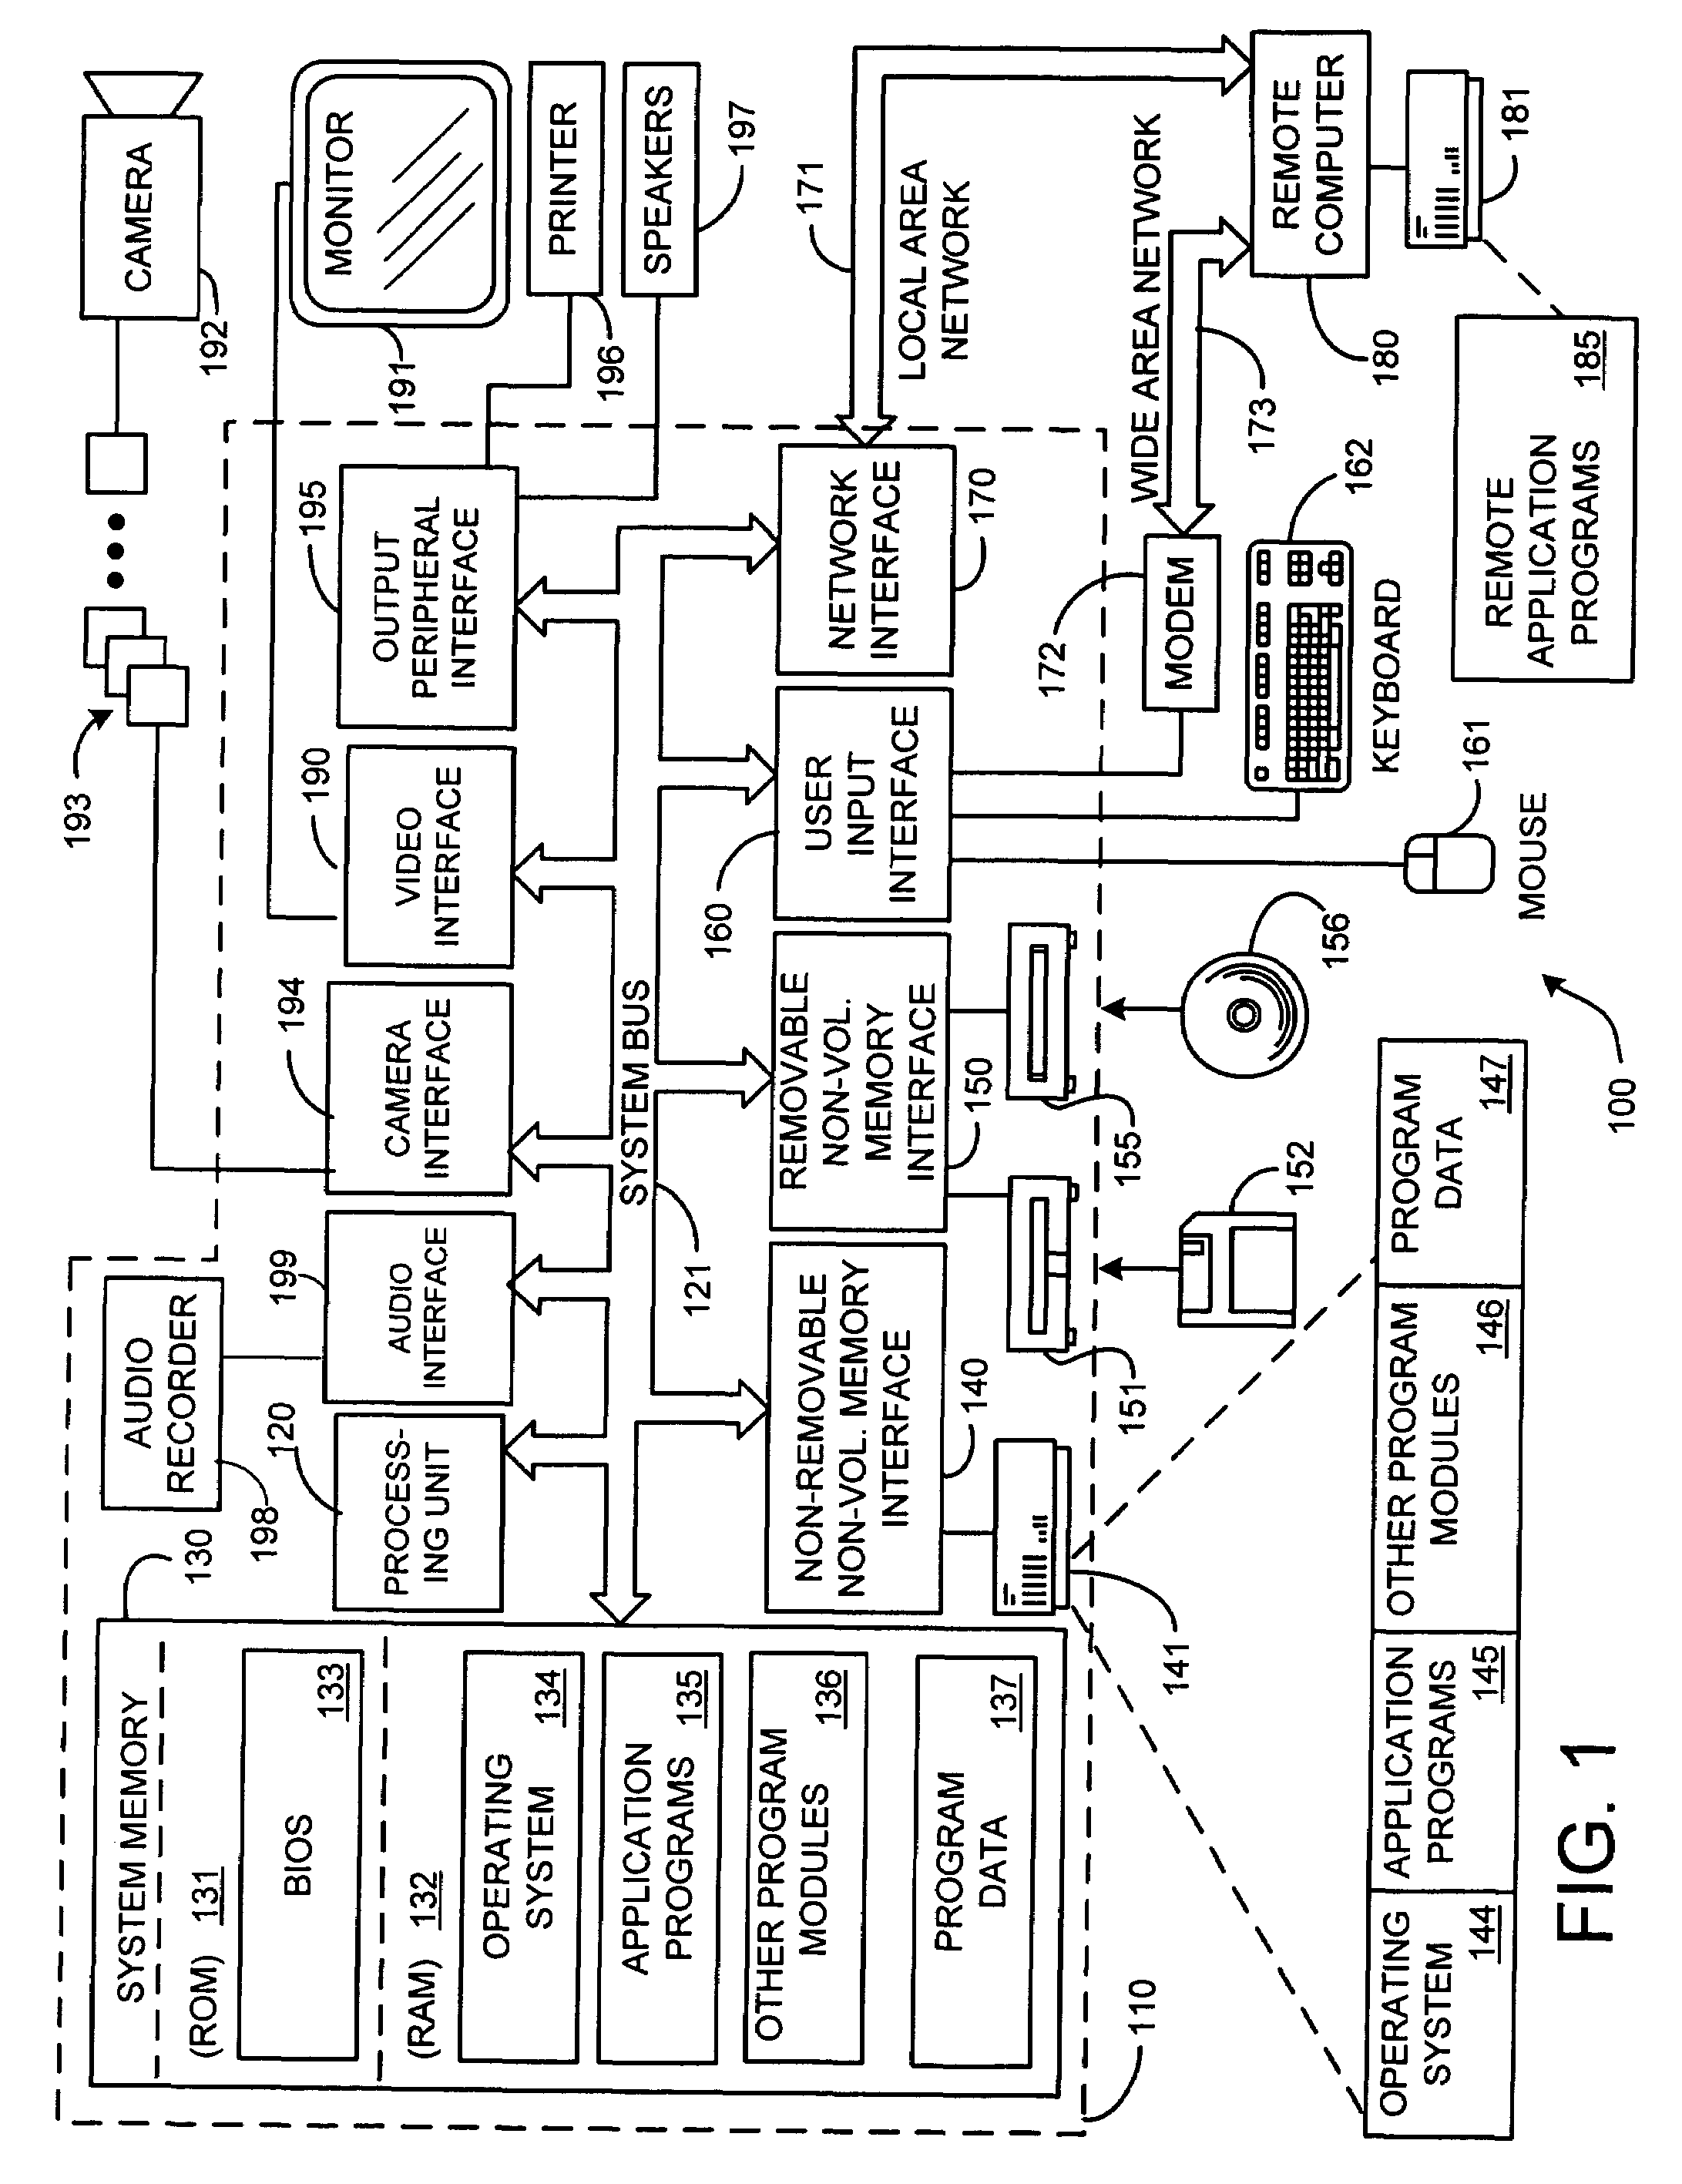 System and method for calibrating multiple cameras without employing a pattern by inter-image homography